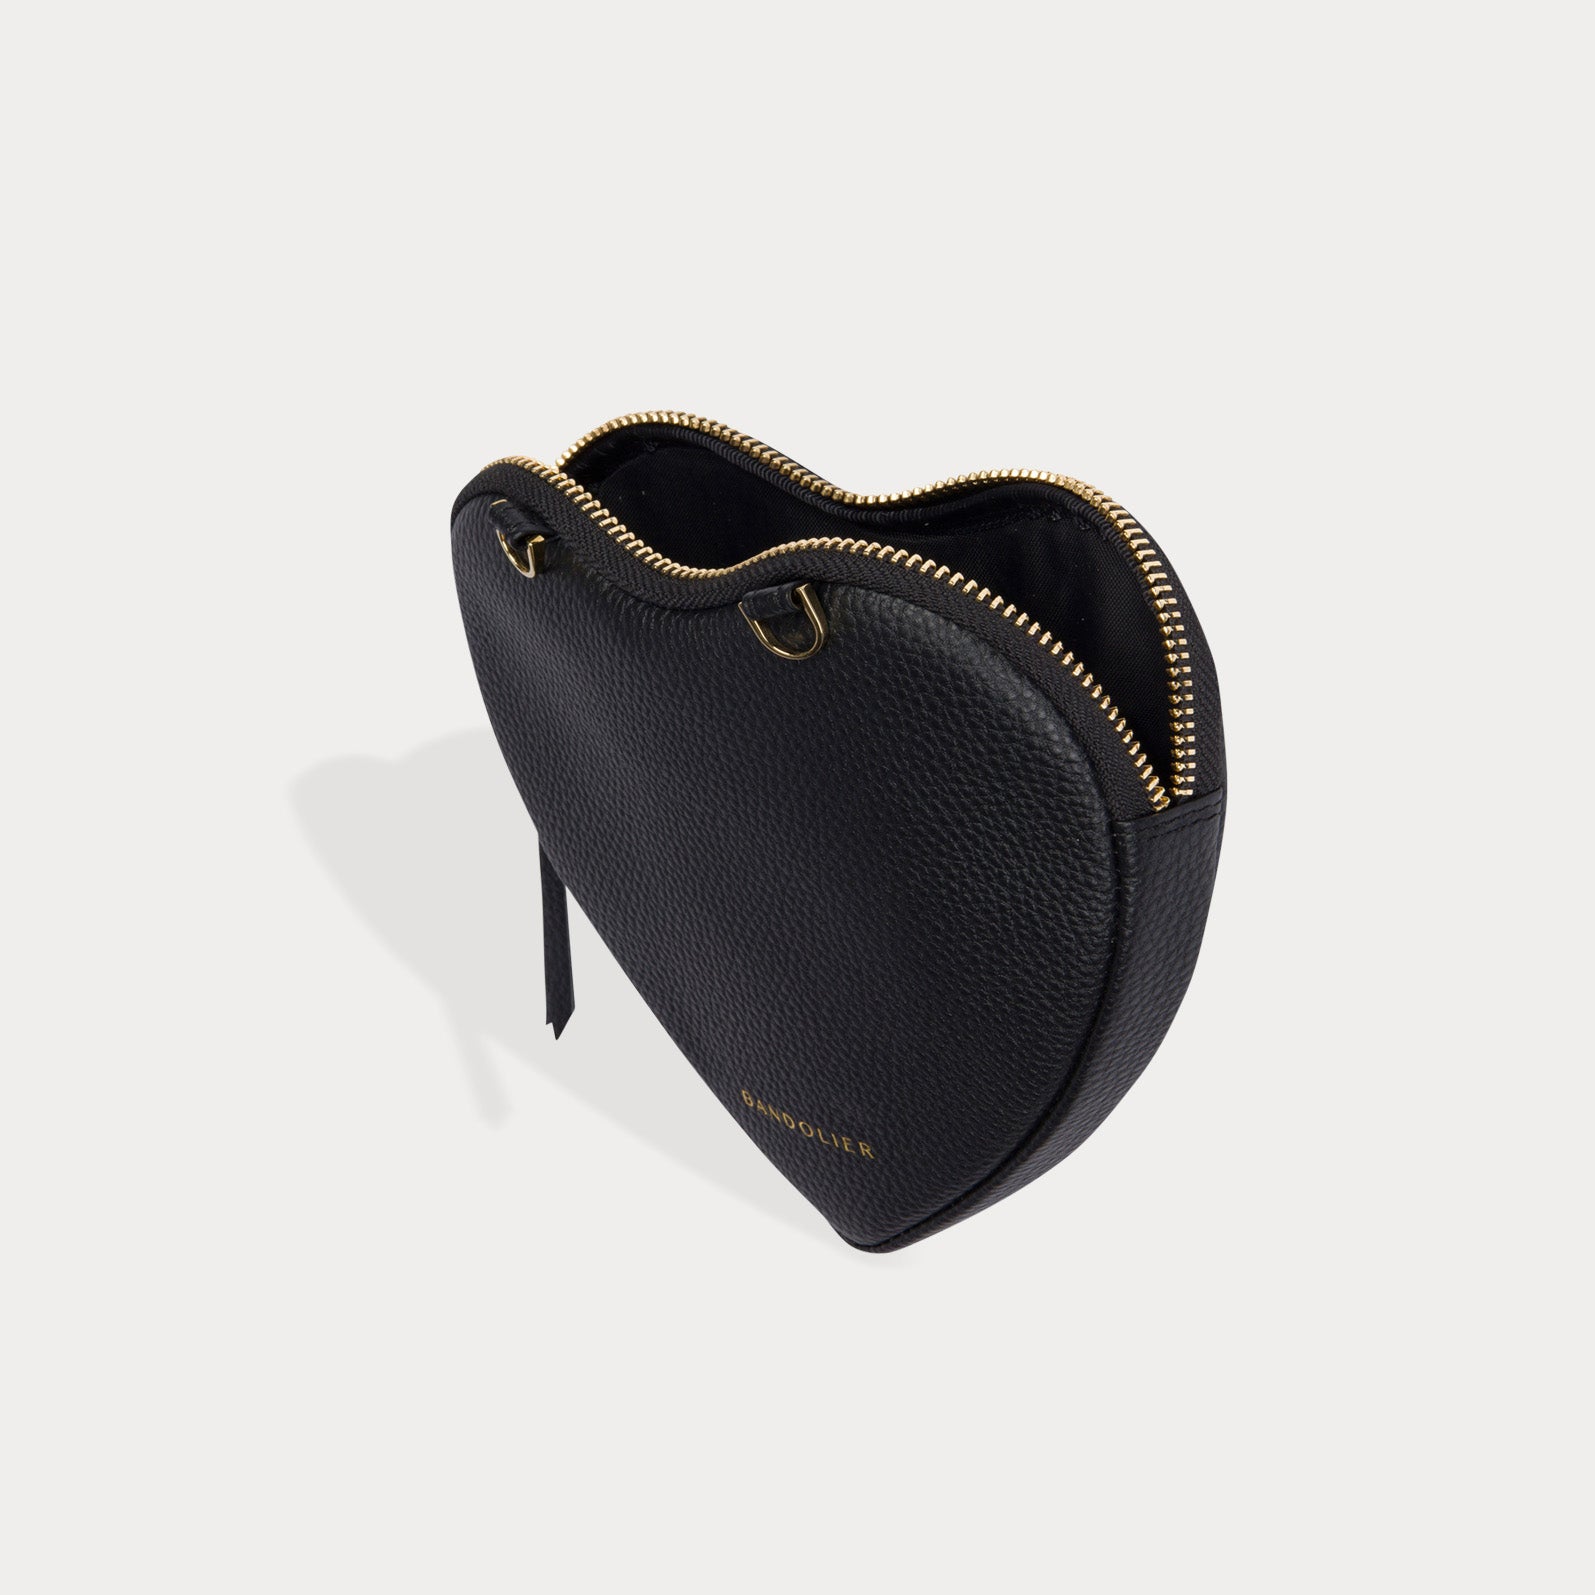 Expanded Heart Pouch - Black/Gold